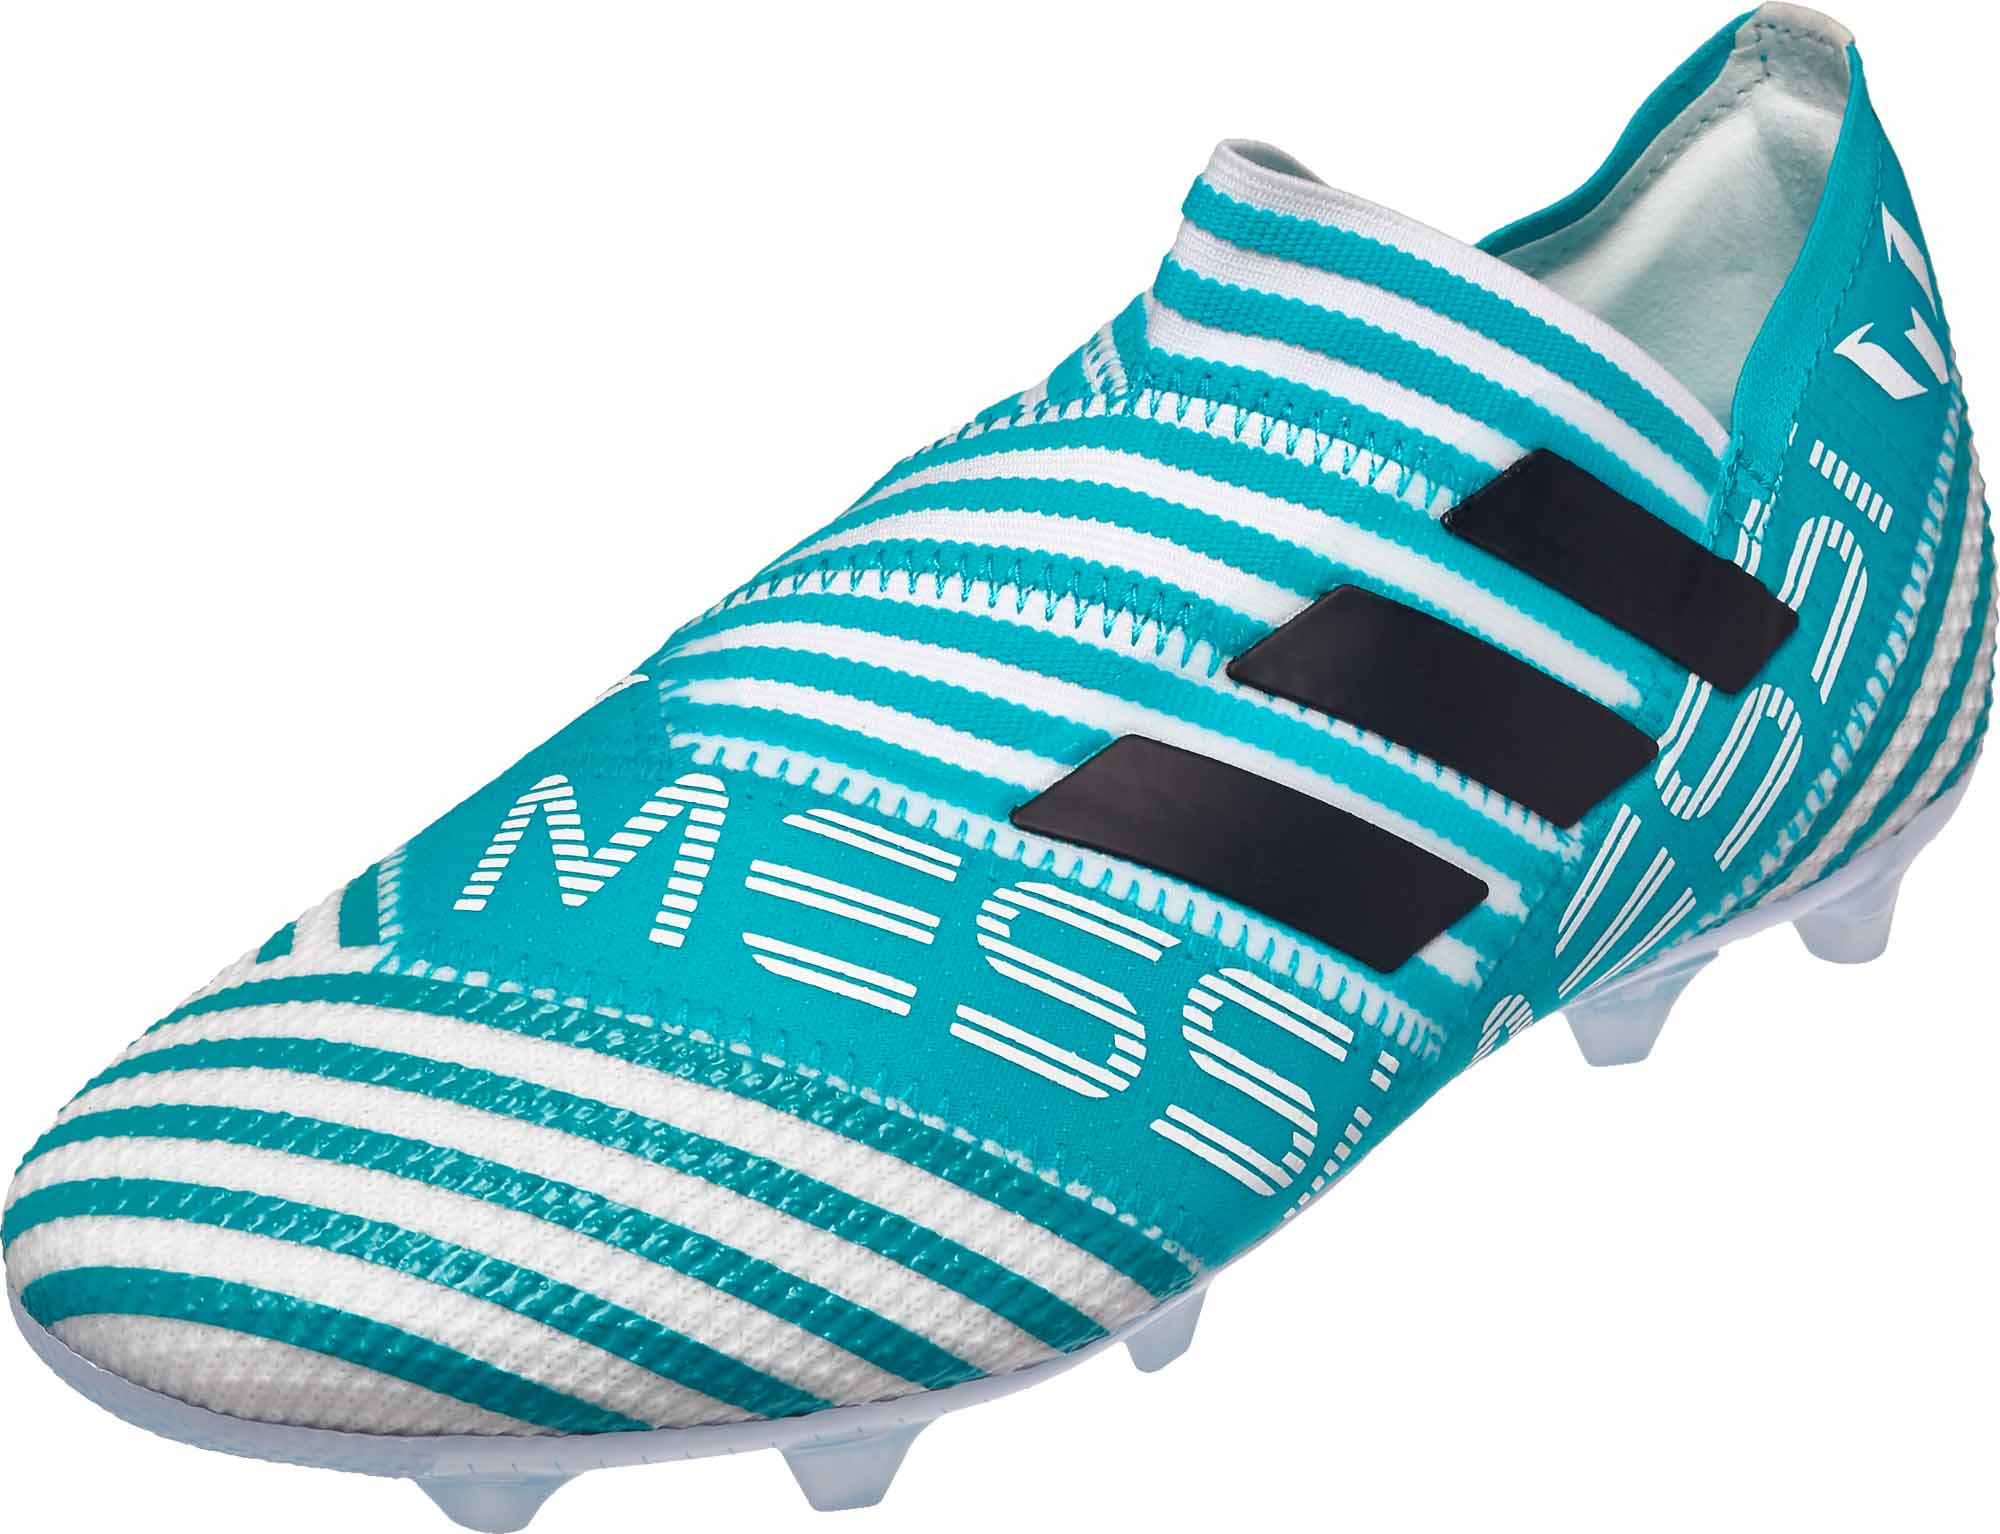 messi youth soccer cleats